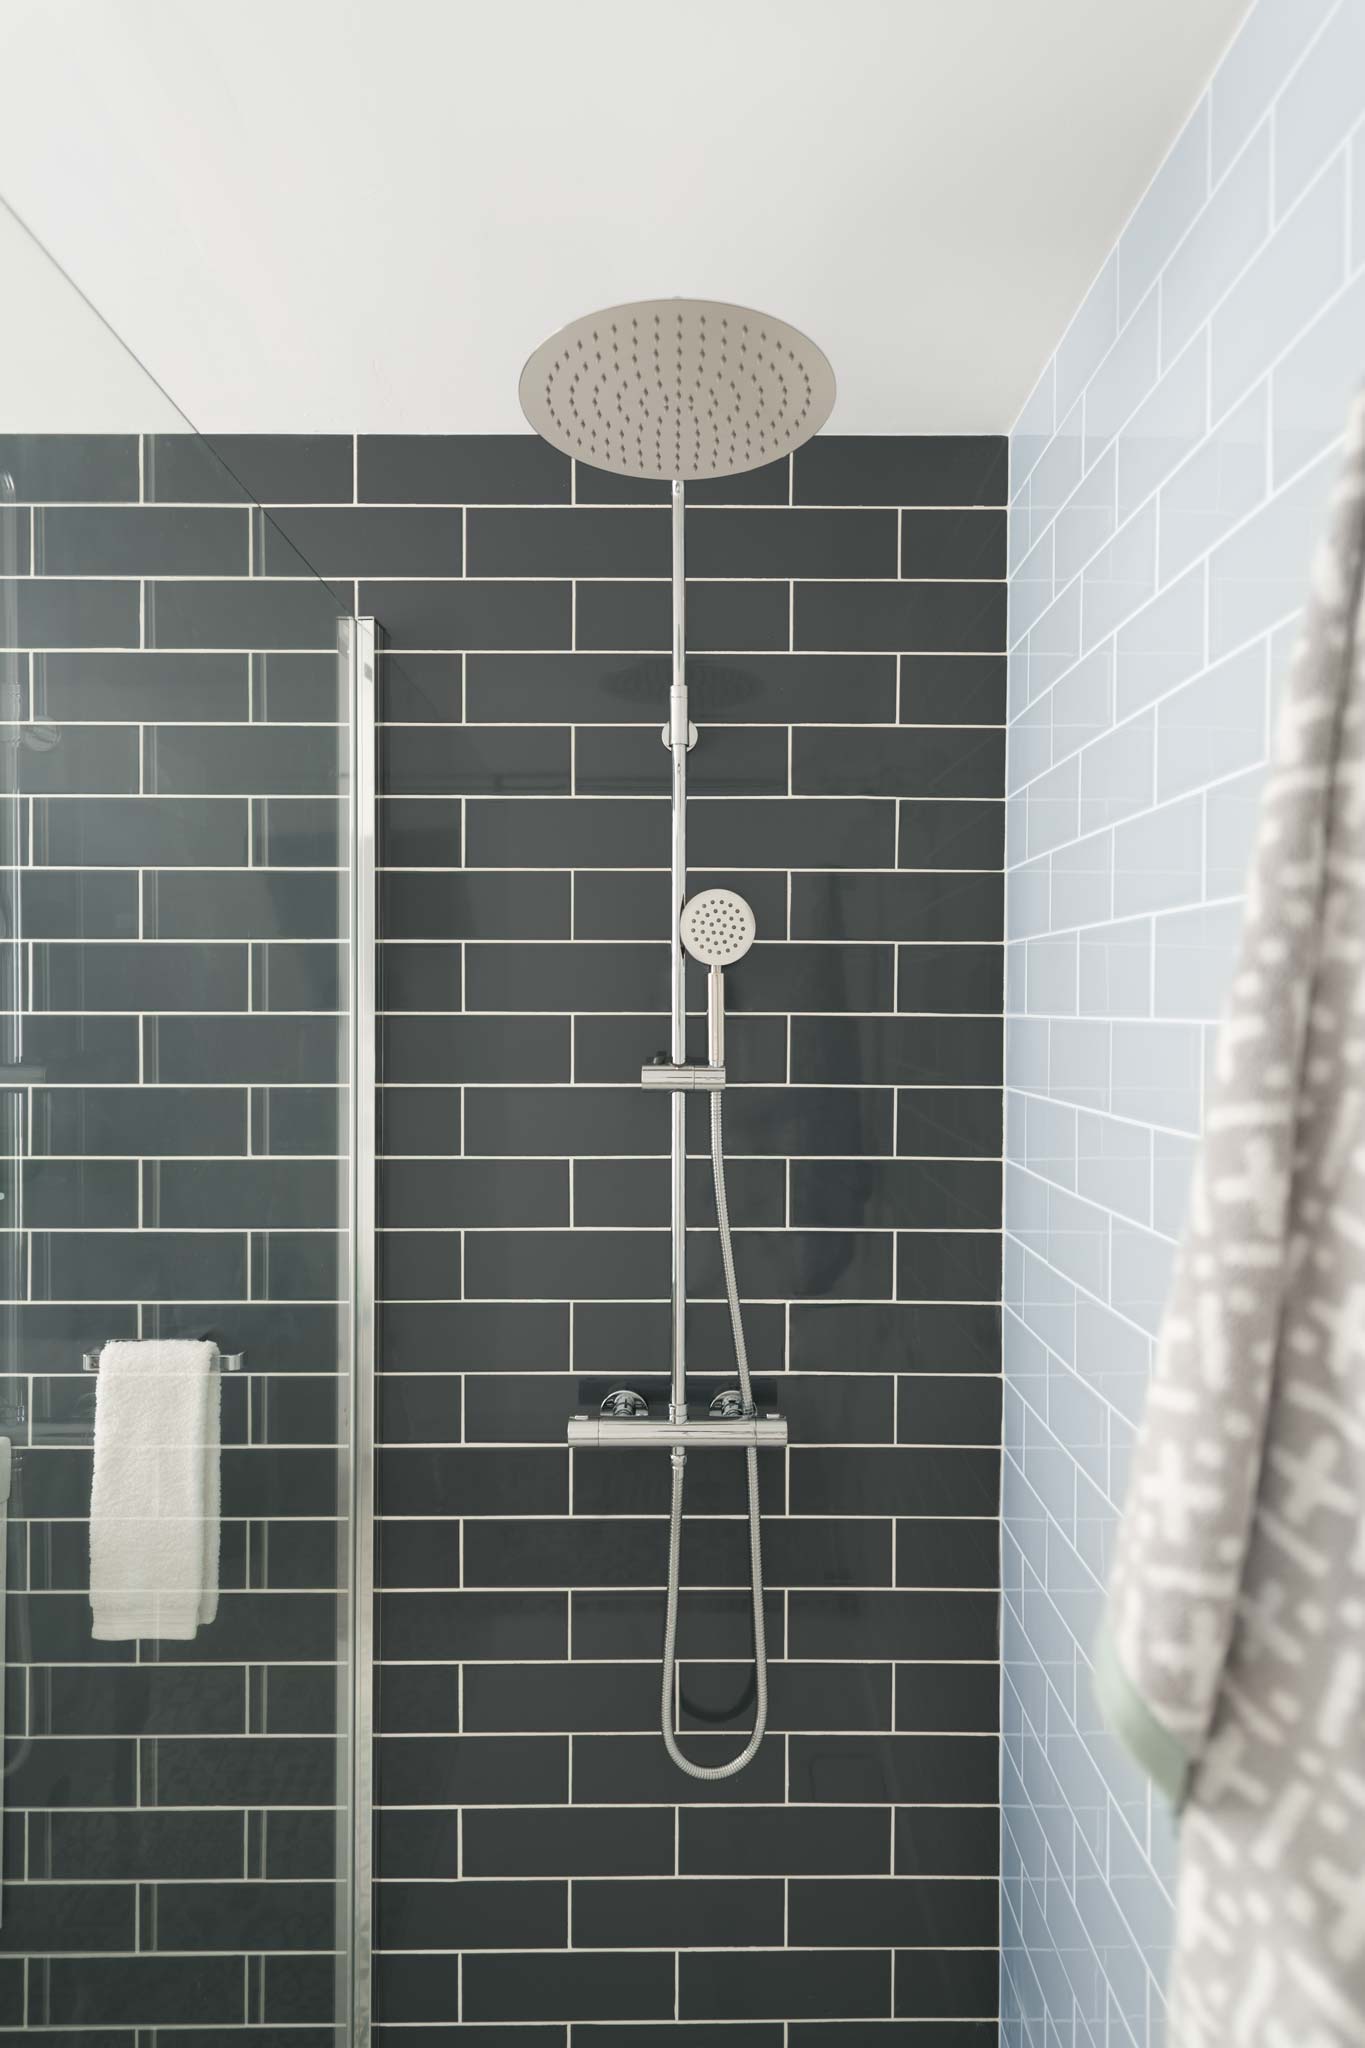 A wall mounted thermostatic shower mixer with a rigid riser on a tiled wall with a shower screen and towels